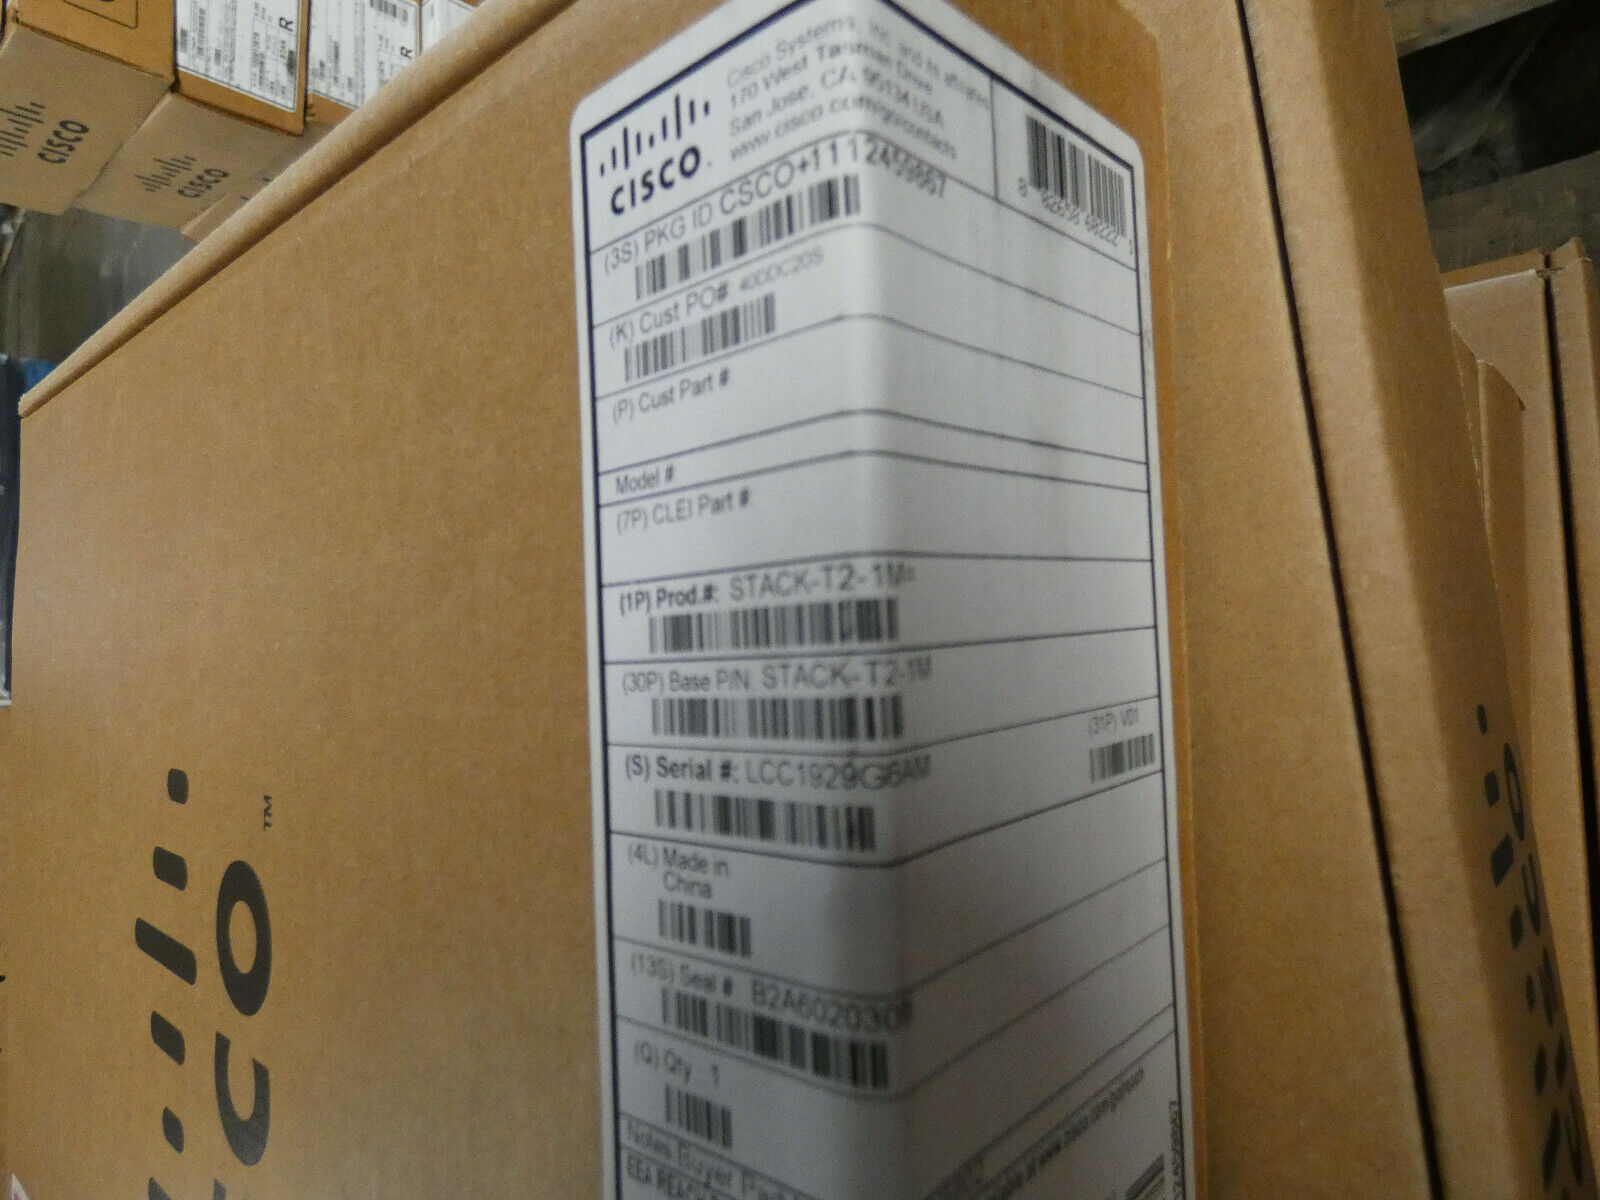 New Cisco Stack-T2-1M Stacking Cable